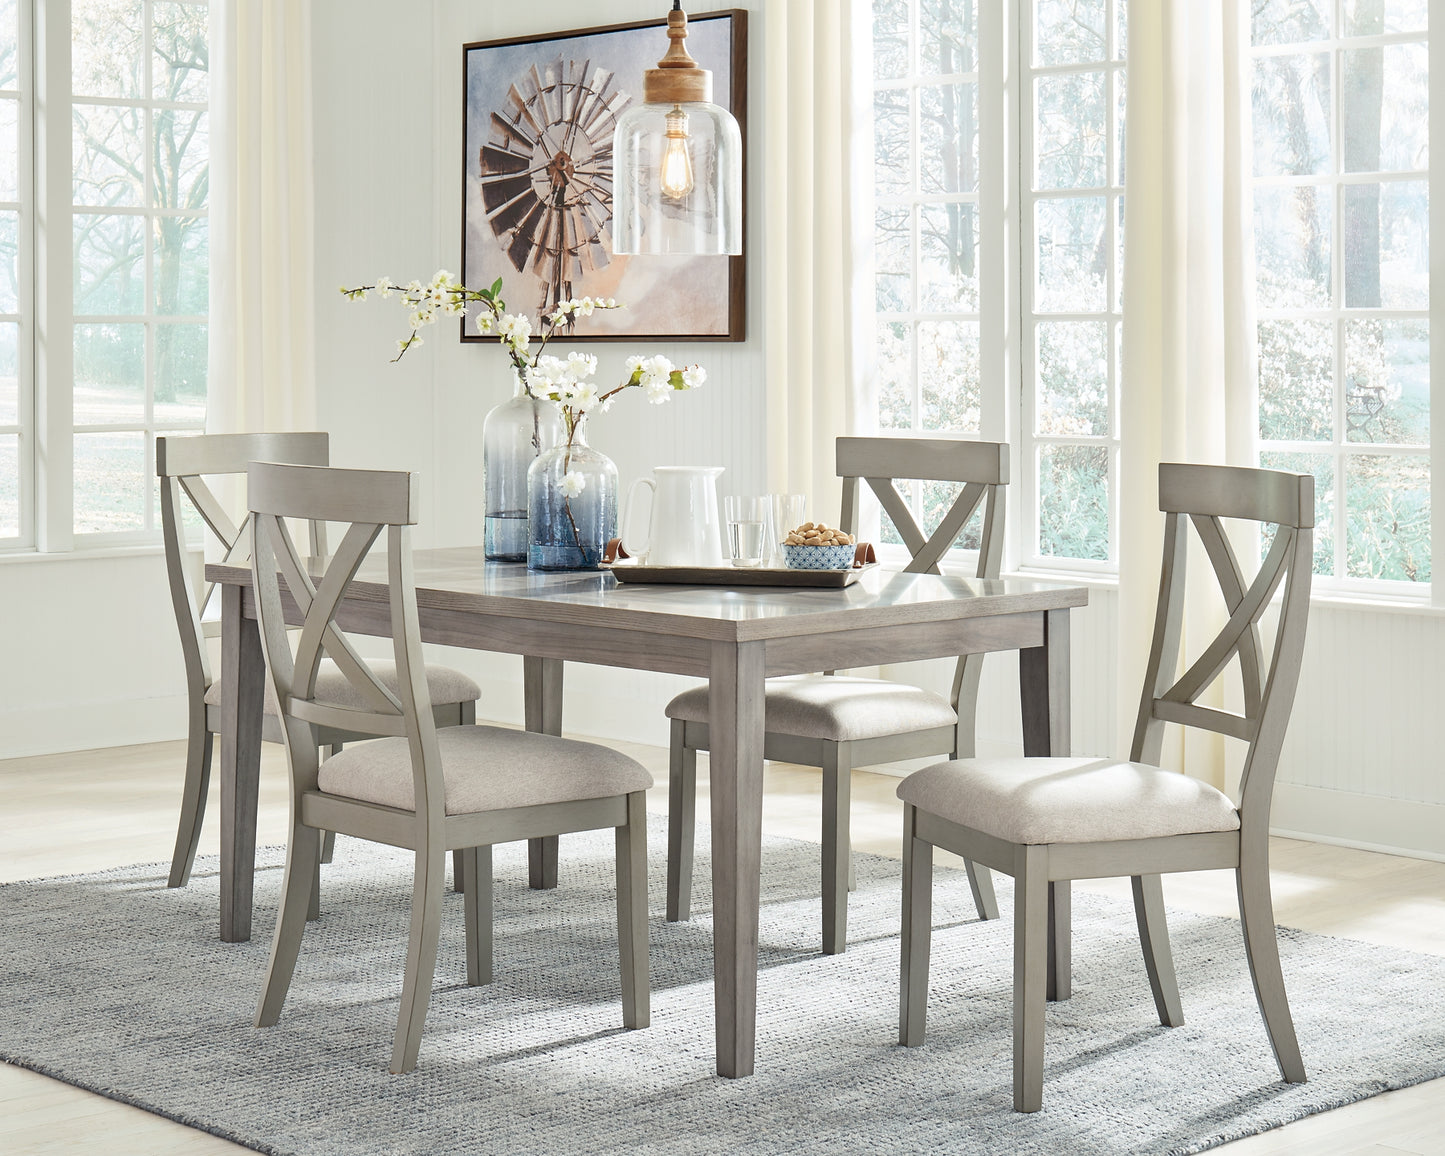 Parellen Dining Table and 4 Chairs JB's Furniture  Home Furniture, Home Decor, Furniture Store